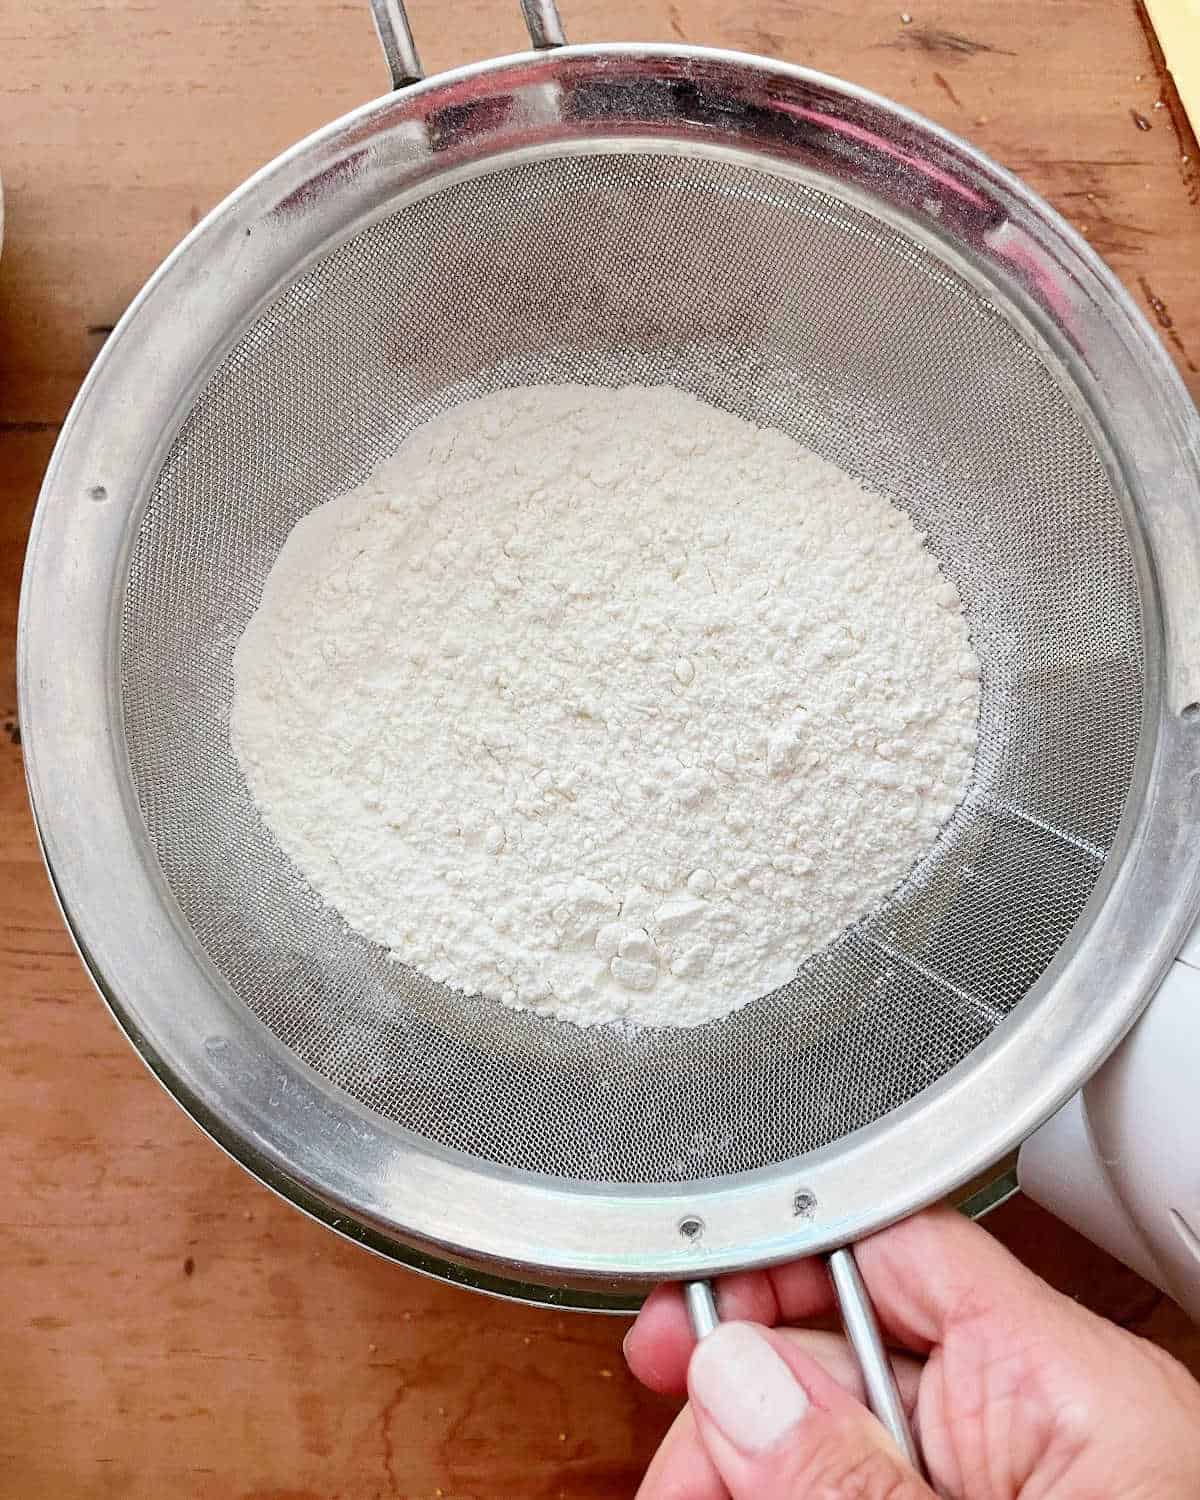 Sifting flour mixture over bowl set on a wooden surface.